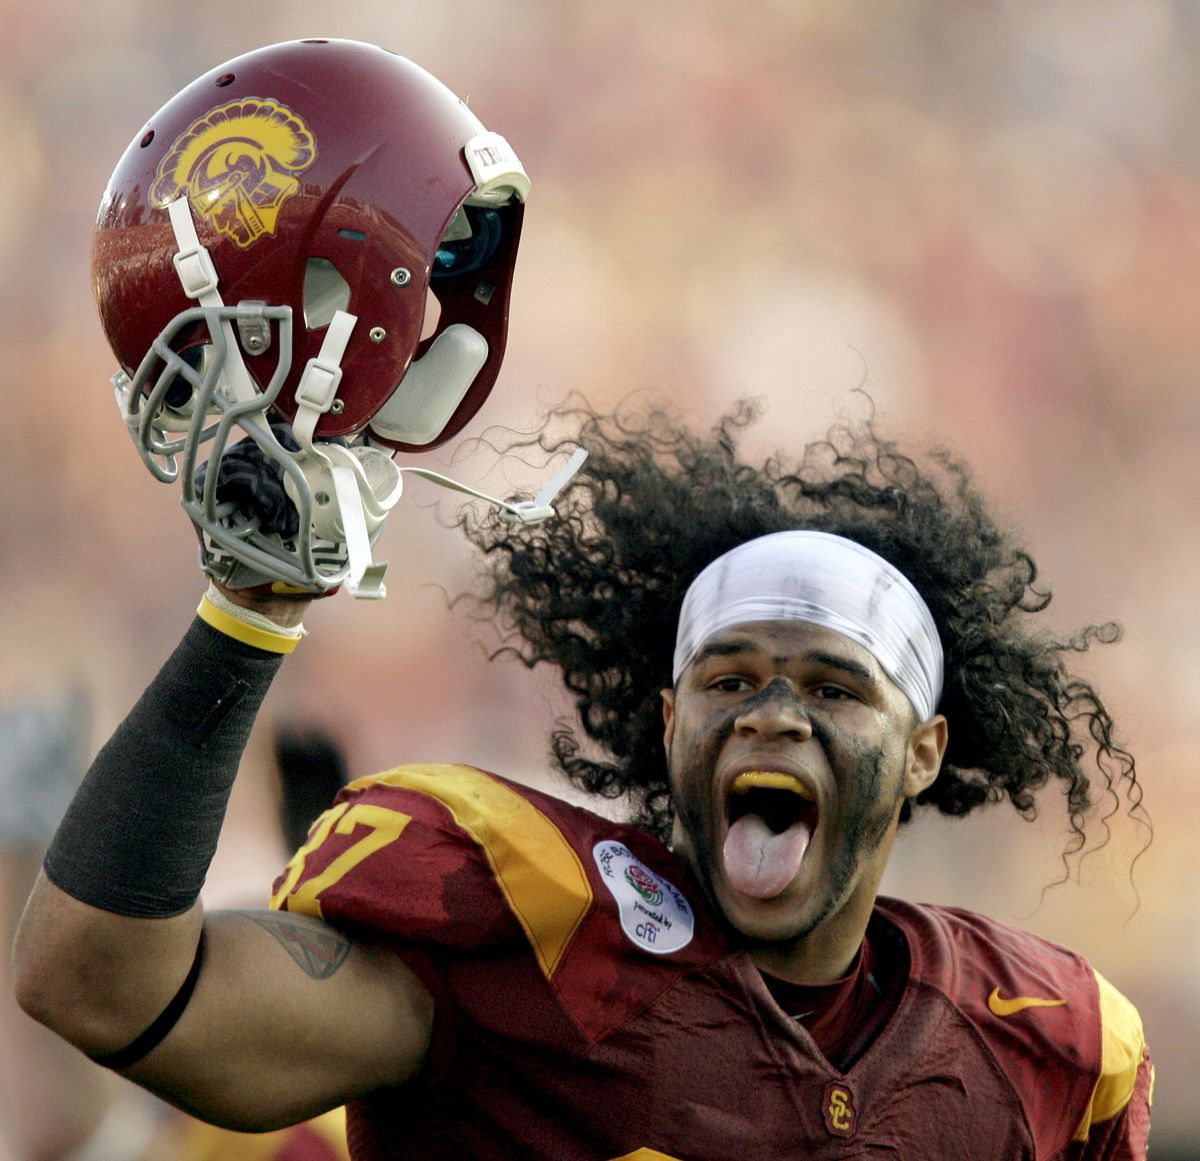 USC and linebacker Jordan Campbell enjoyed New Year’s Day. (Associated Press / The Spokesman-Review)